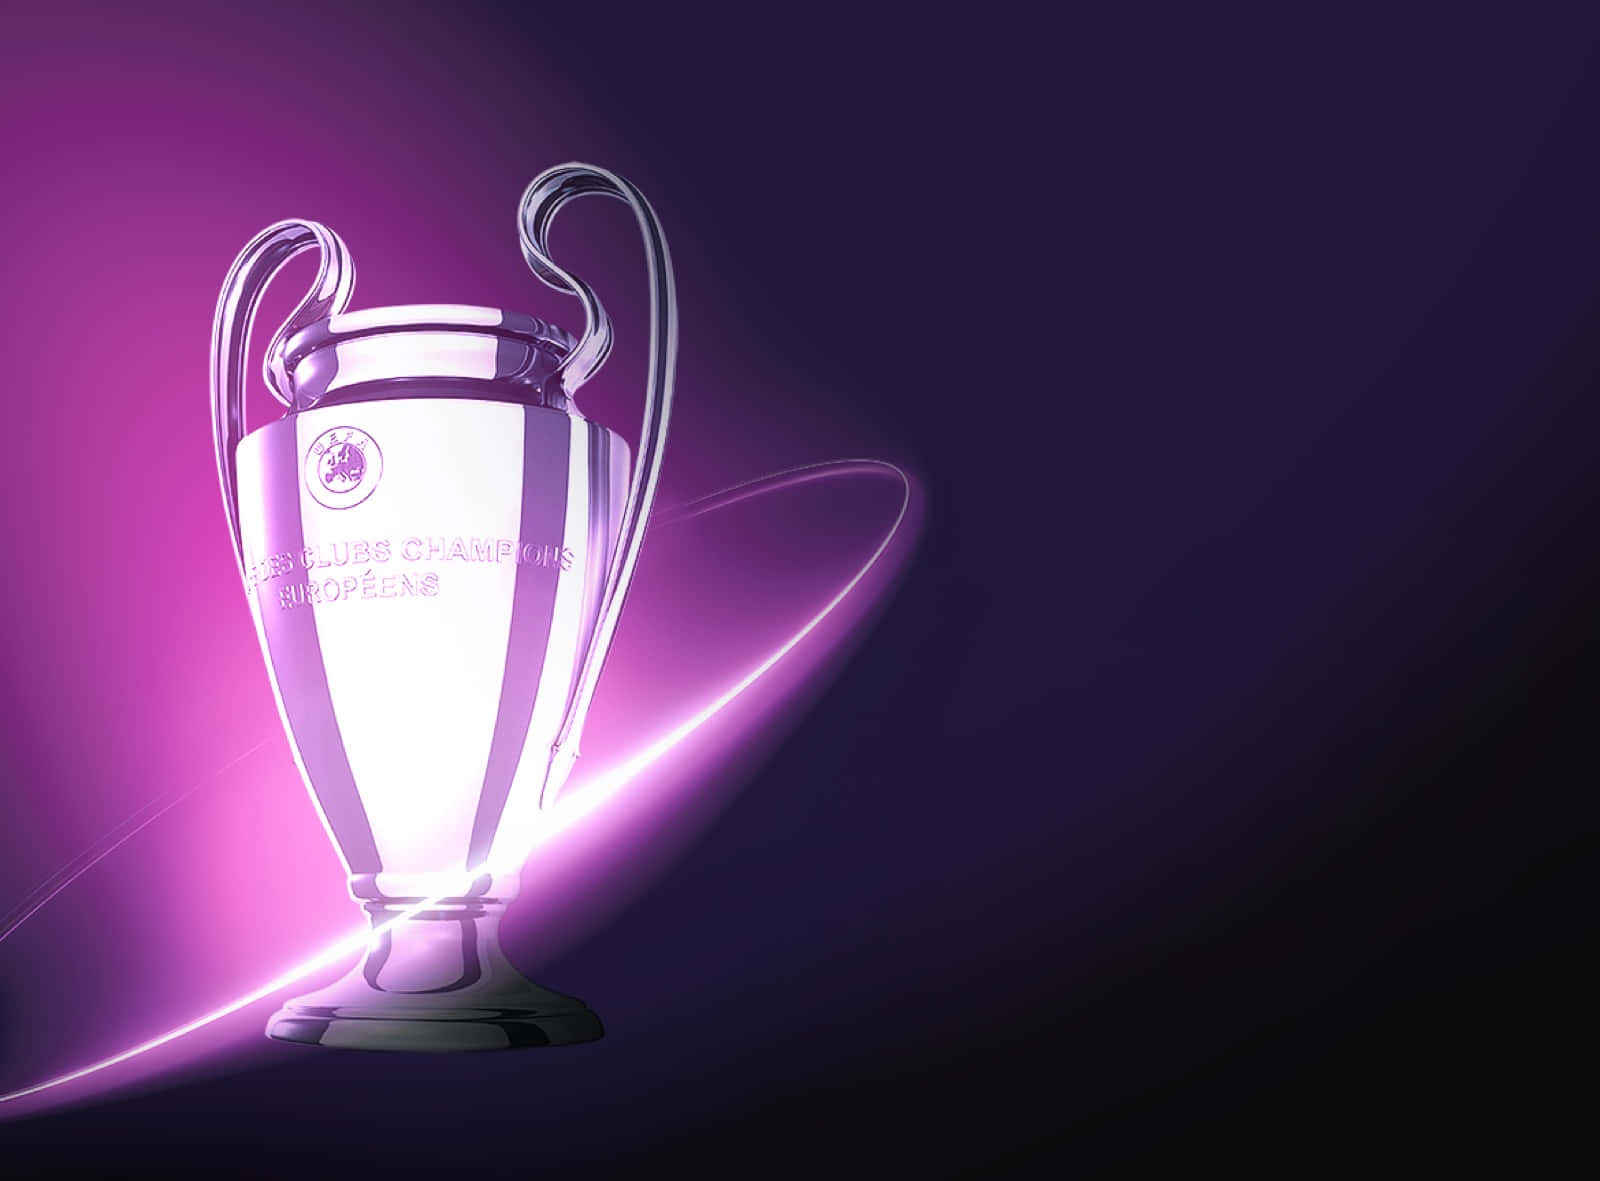 The Celebration of Champions League Wins